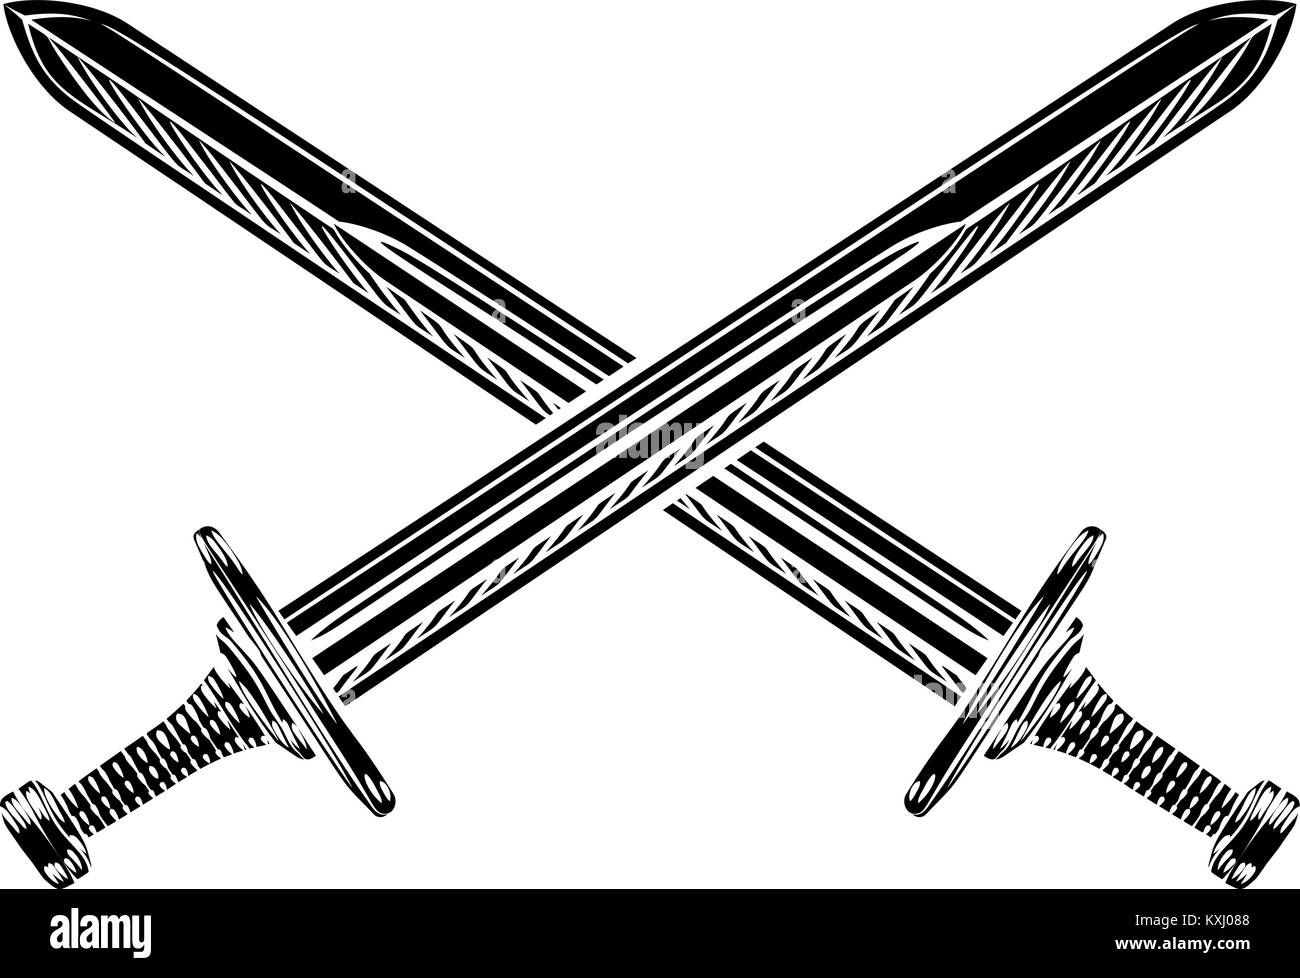 Crossed Sword Cliparts, Stock Vector and Royalty Free Crossed Sword  Illustrations